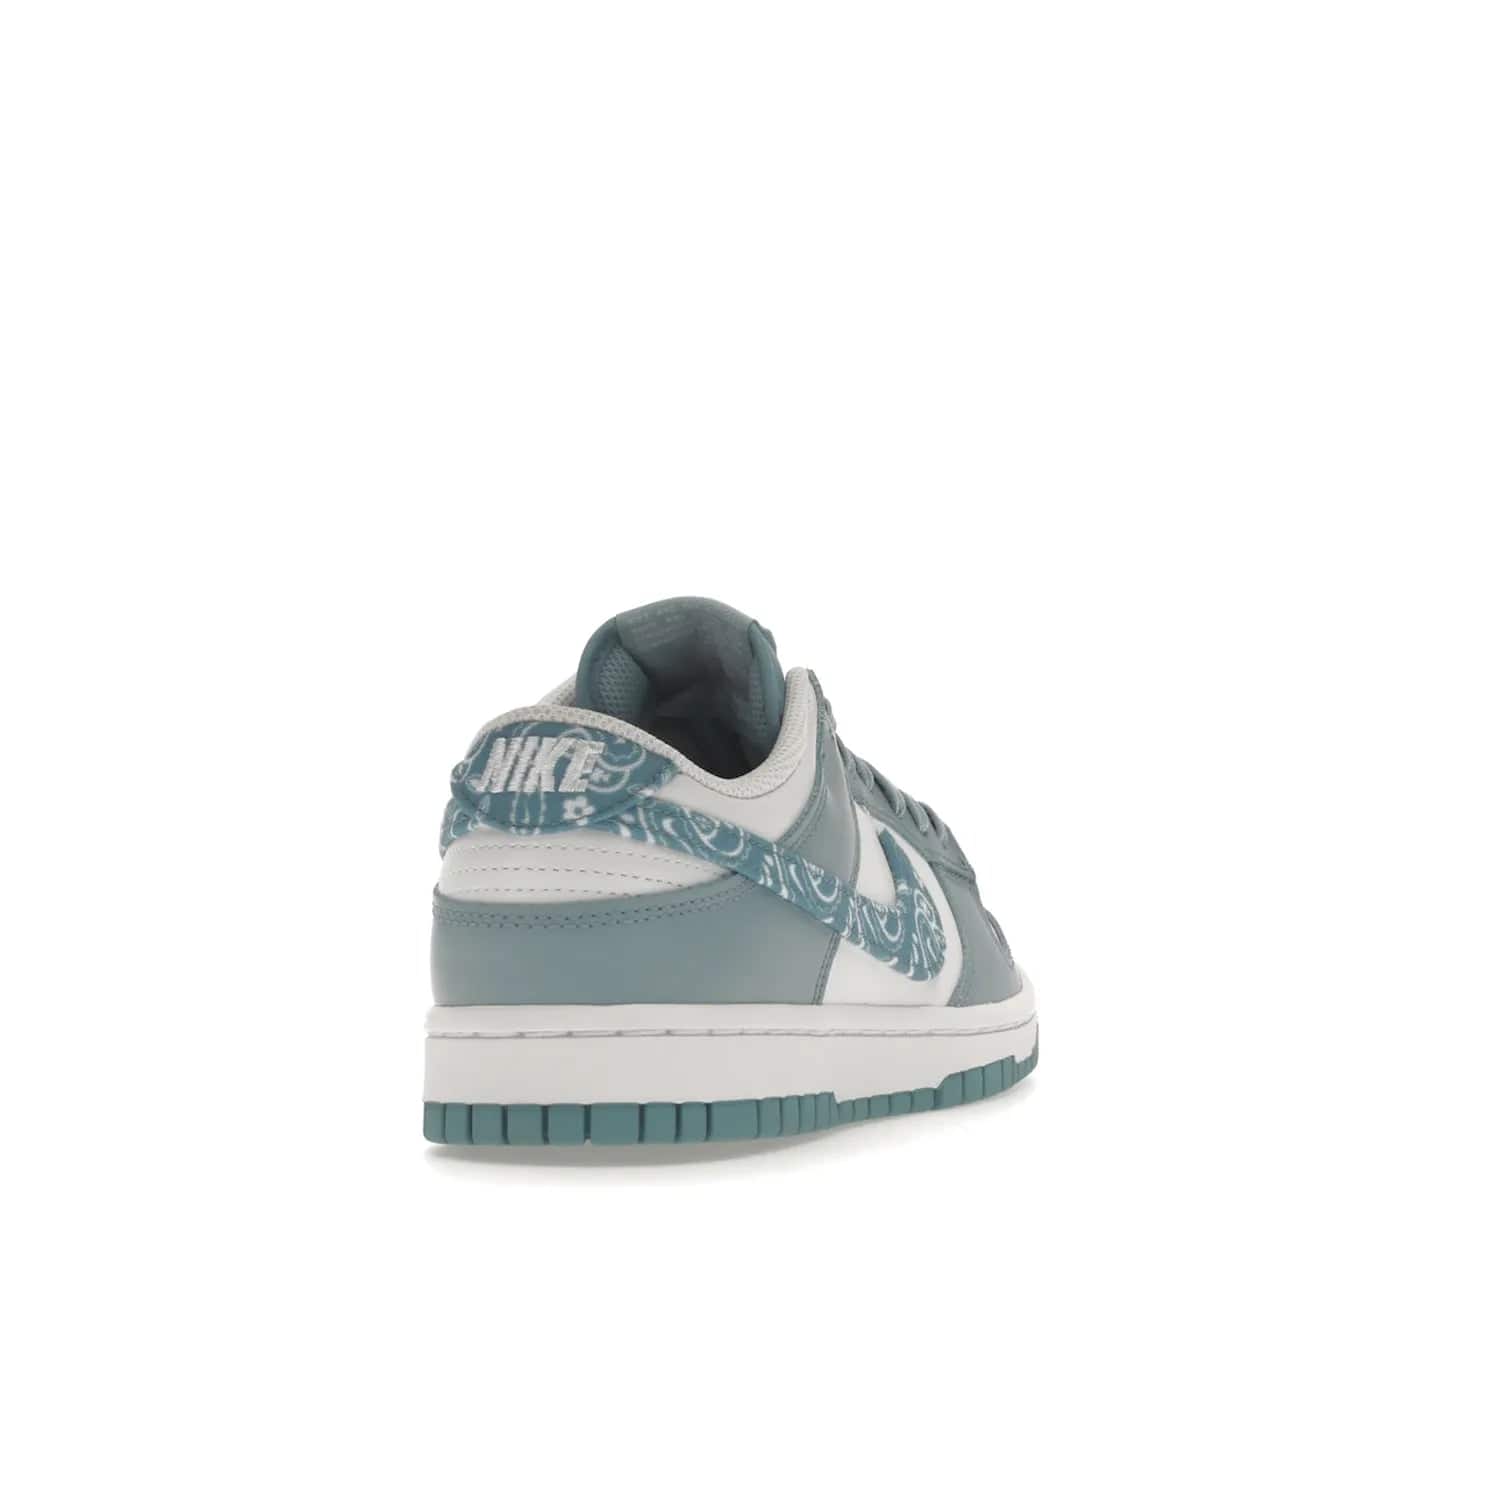 Nike Dunk Low Essential Paisley Pack Worn Blue (Women's) - Image 30 - Only at www.BallersClubKickz.com - Get the Nike Dunk Low Essential Paisley Pack Worn Blue (Women's) for style and comfort. White leather construction, light blue leather overlays, canvas Swooshes and matching heel tabs offer a rich blue hue. Finished by a white and light blue sole, this classic Nike Dunk is the perfect addition to any wardrobe. Released in March 2022.